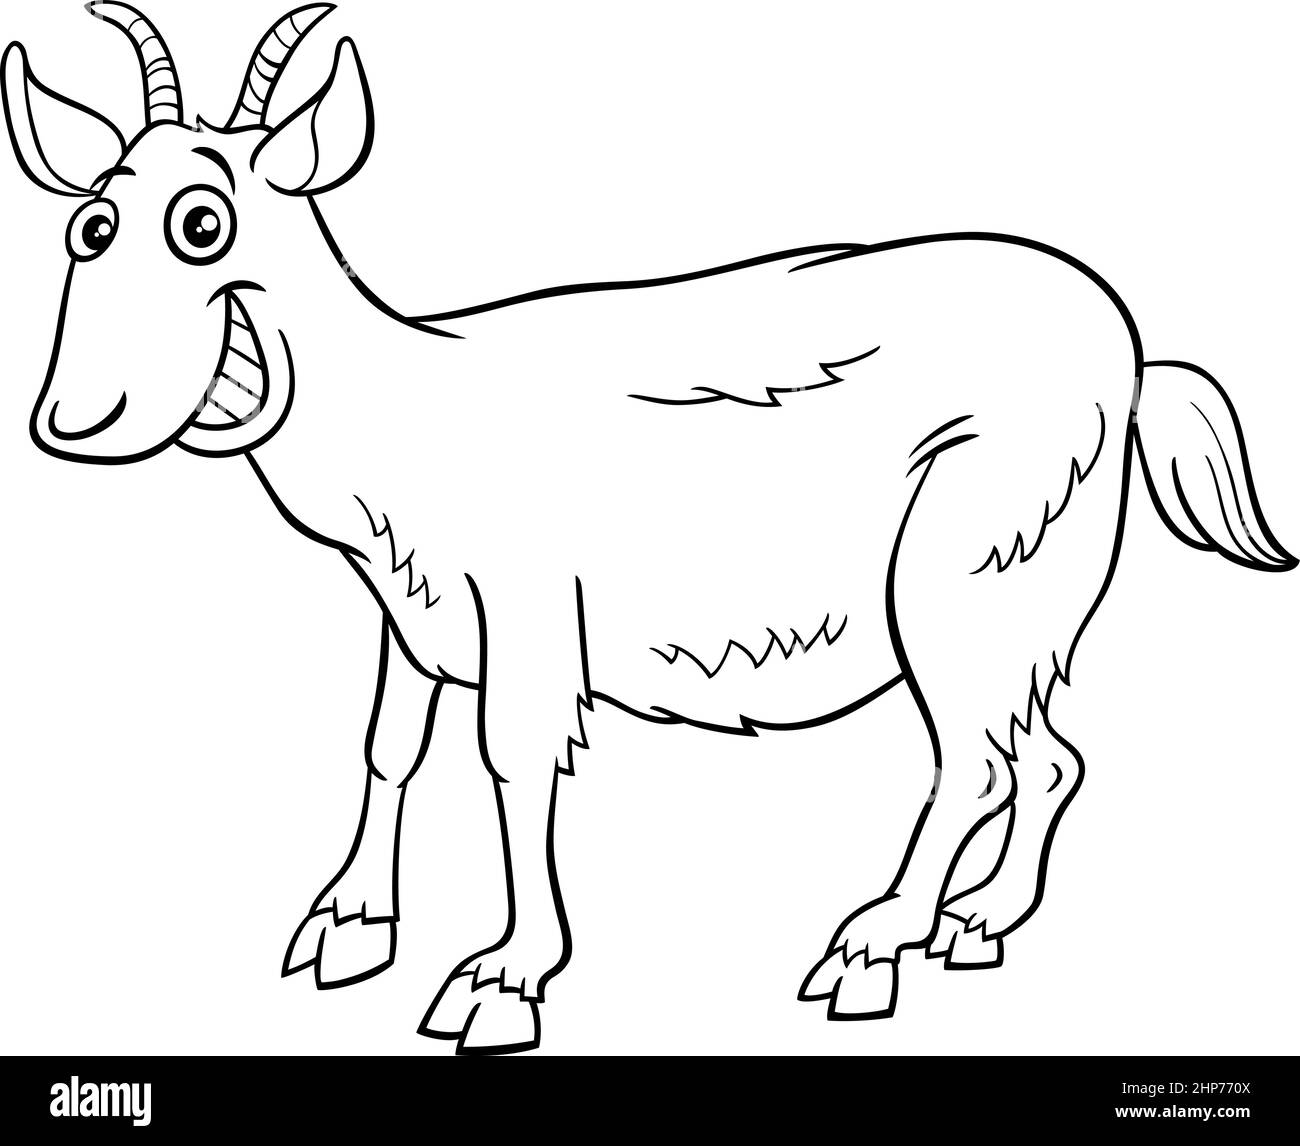 goat farm animal cartoon character coloring book page Stock Vector